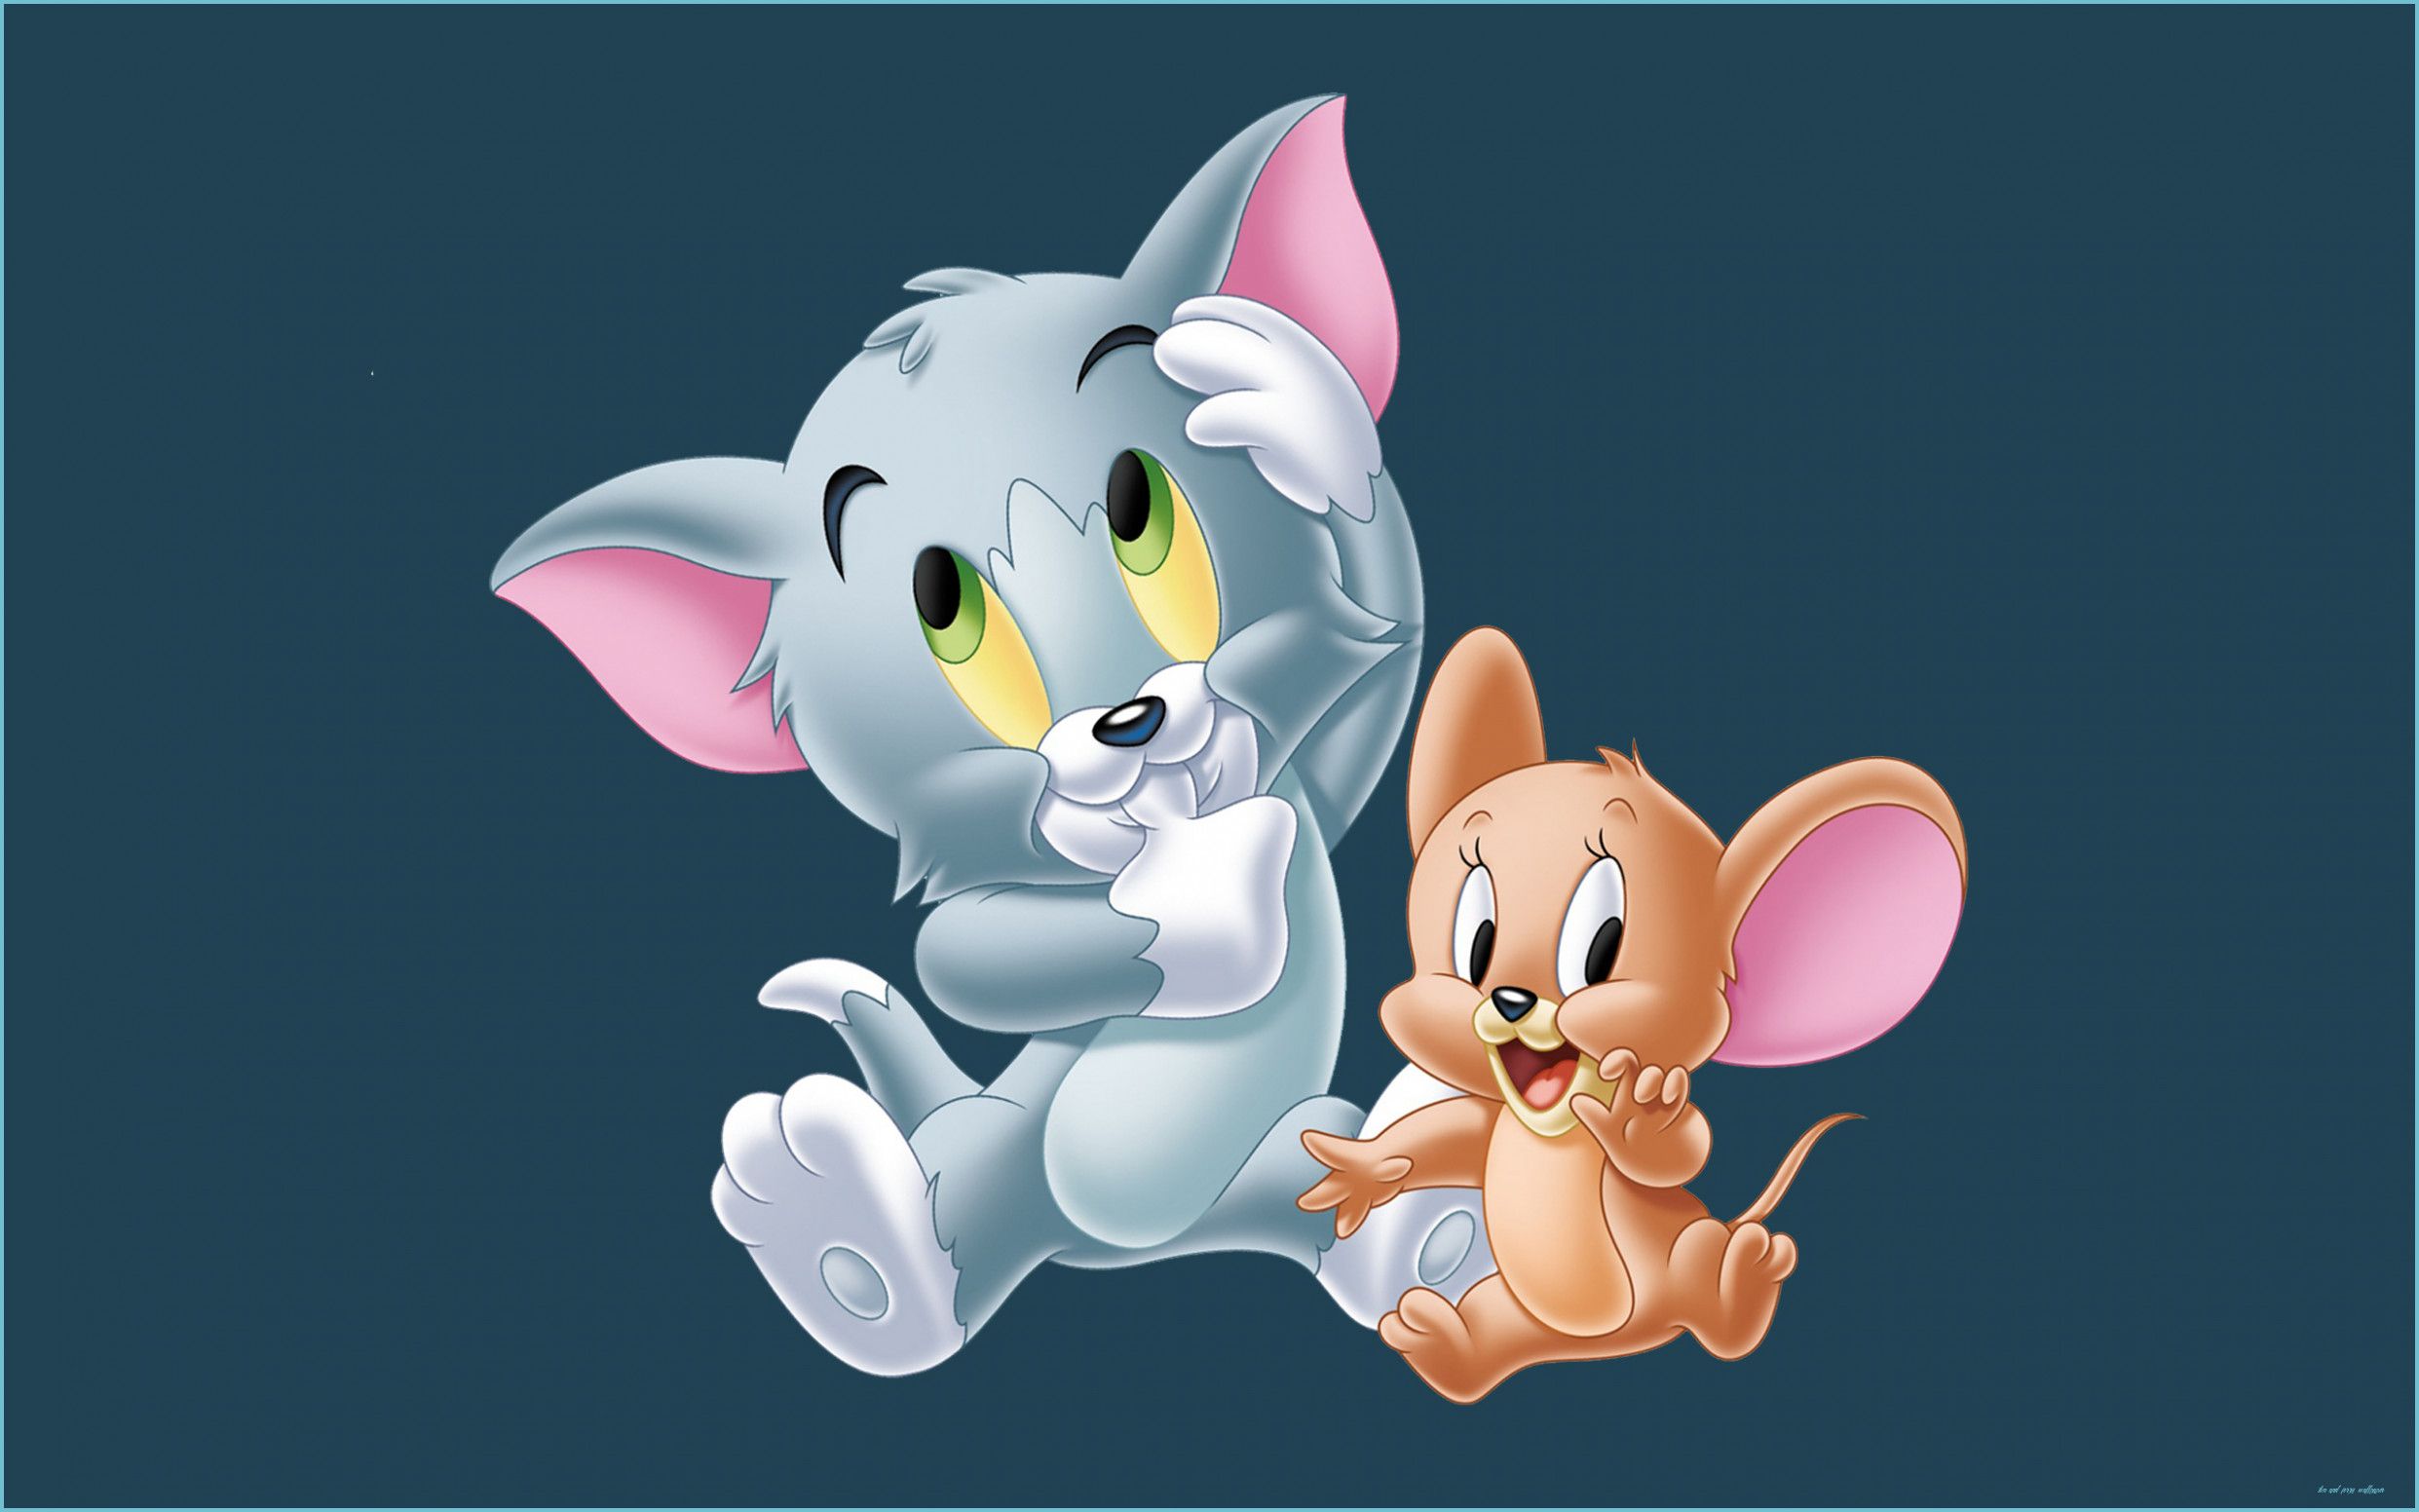 Tom And Jerry As Small Babies Desktop HD Wallpaper For Mobile and jerry wallpaper